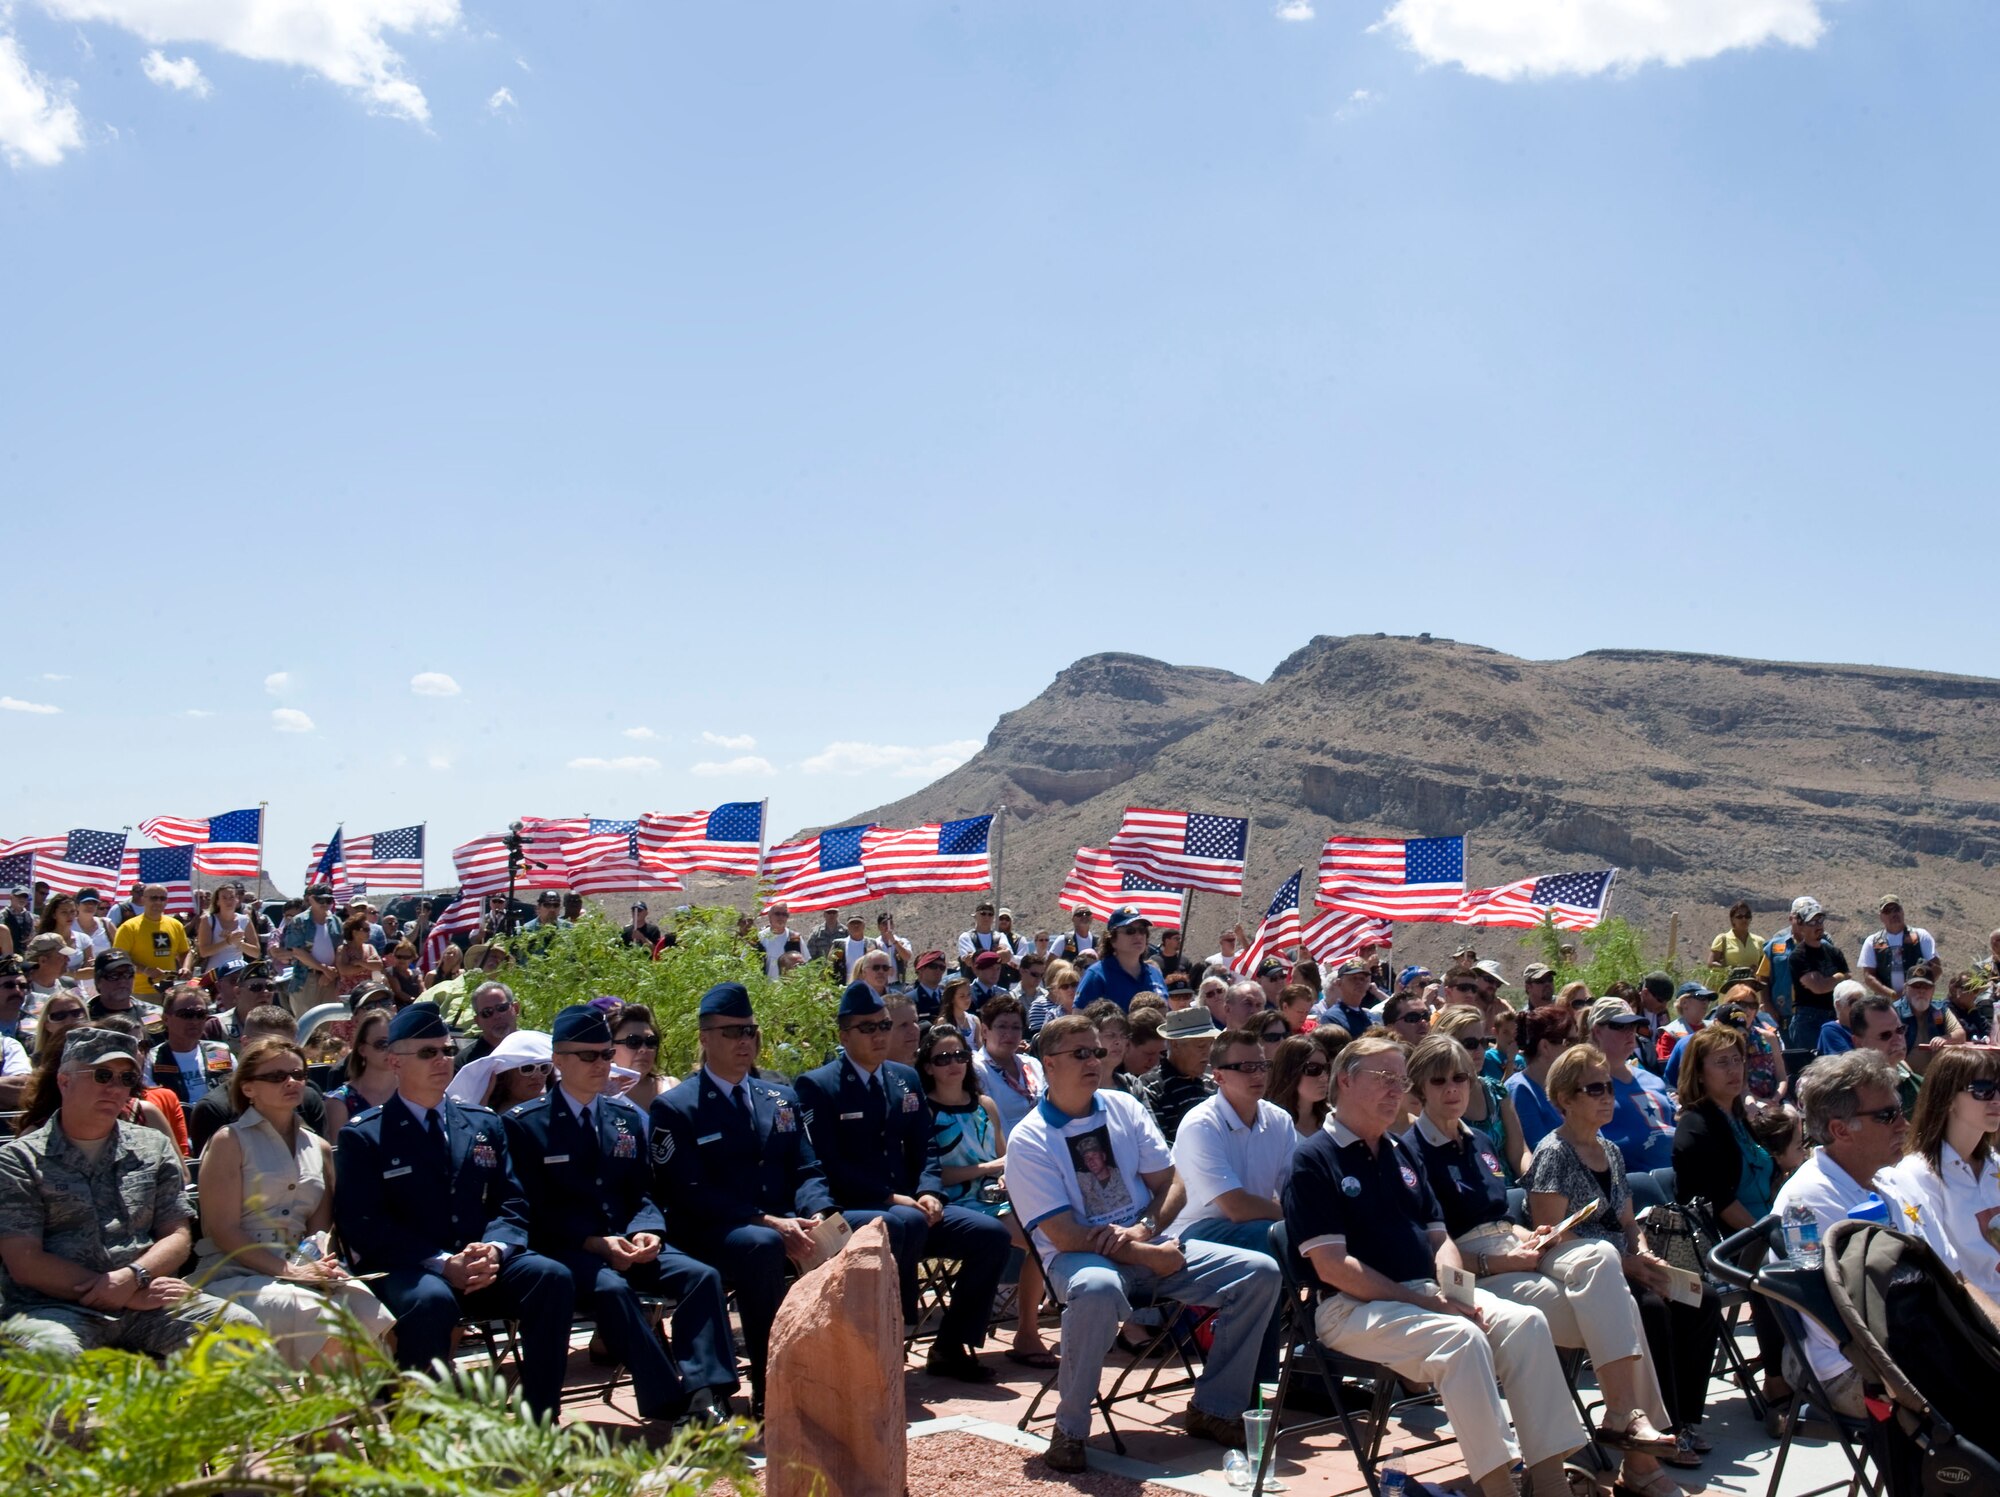 LAS VEGAS -- Attendees listen as guest speakers honor fallen servicemembers with Nevada ties during the 6th annual Defending Freedom Memorial dedication ceremony at the Red Rock National Conservation Area May 14, 2011. The Defending Freedom Memorial was initially dedicated in 2005 and is comprised of seven sandstones with the engraved names of Nevada's fallen servicemen and women. This year, the names Nellis Airmen Senior Airman Michael Buras, Staff Sgt. David Smith, 1st Lt. Joel Gentz and Capt. David Wisniewski were added to the memorial. All four Airmen were lost in 2010 while supporting operations in Afghanistan.  (U.S. Air Force photo by Airman 1st Class Jamie L. Nicley)
